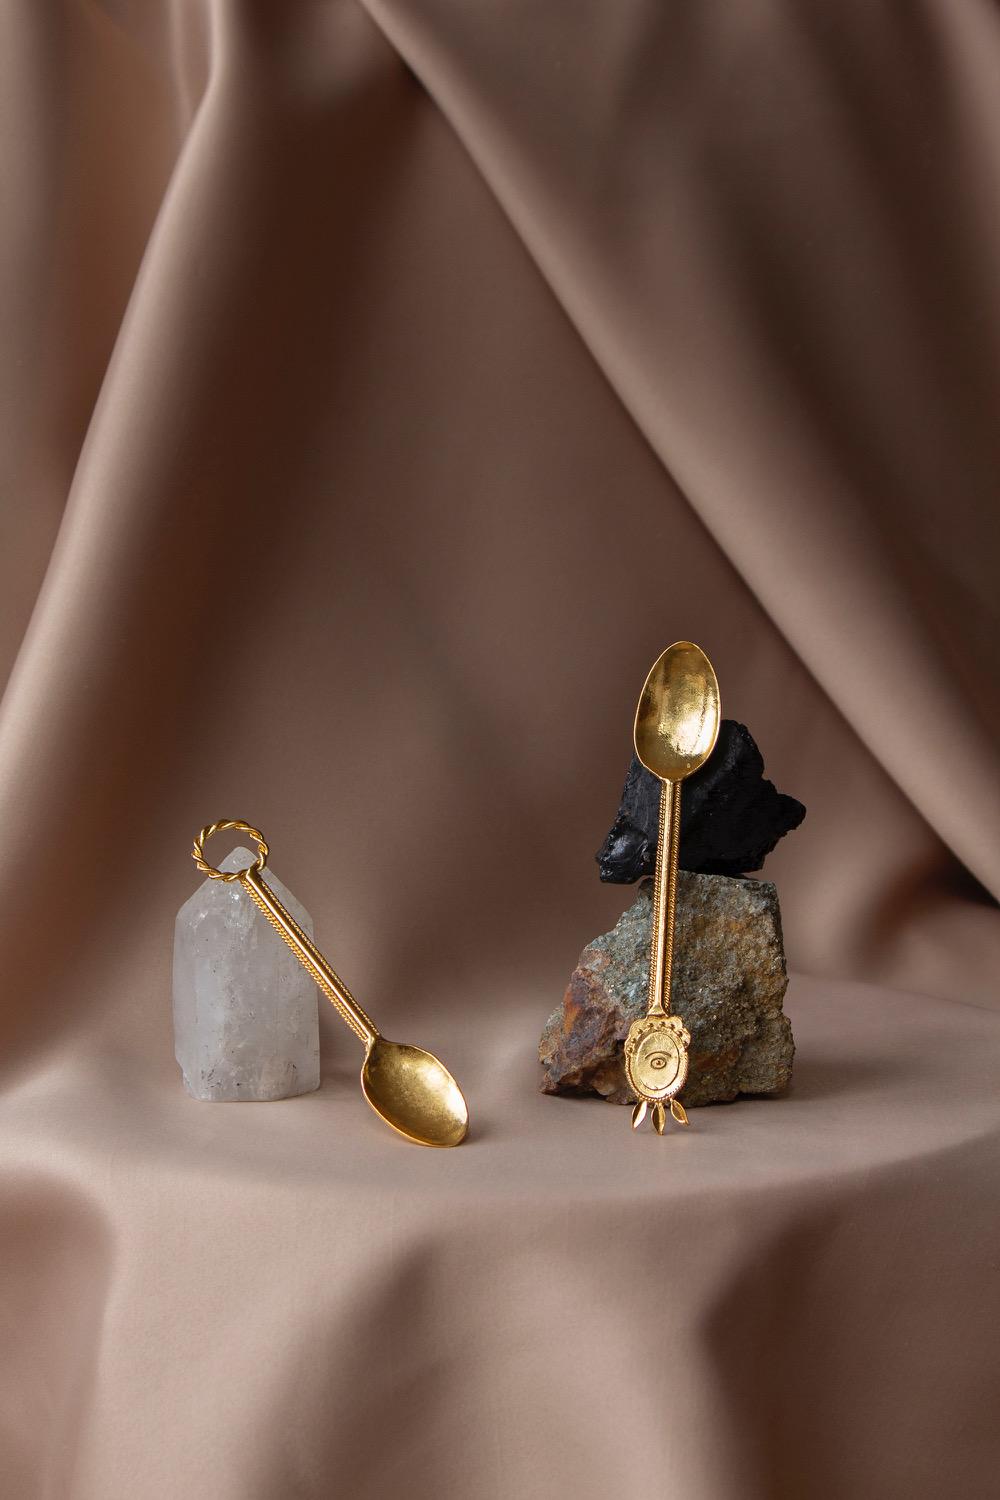 Contemporary Tea Spoons Golden Plated Set Handcrafted in Italy by Natalia Criado (Italienisch) im Angebot